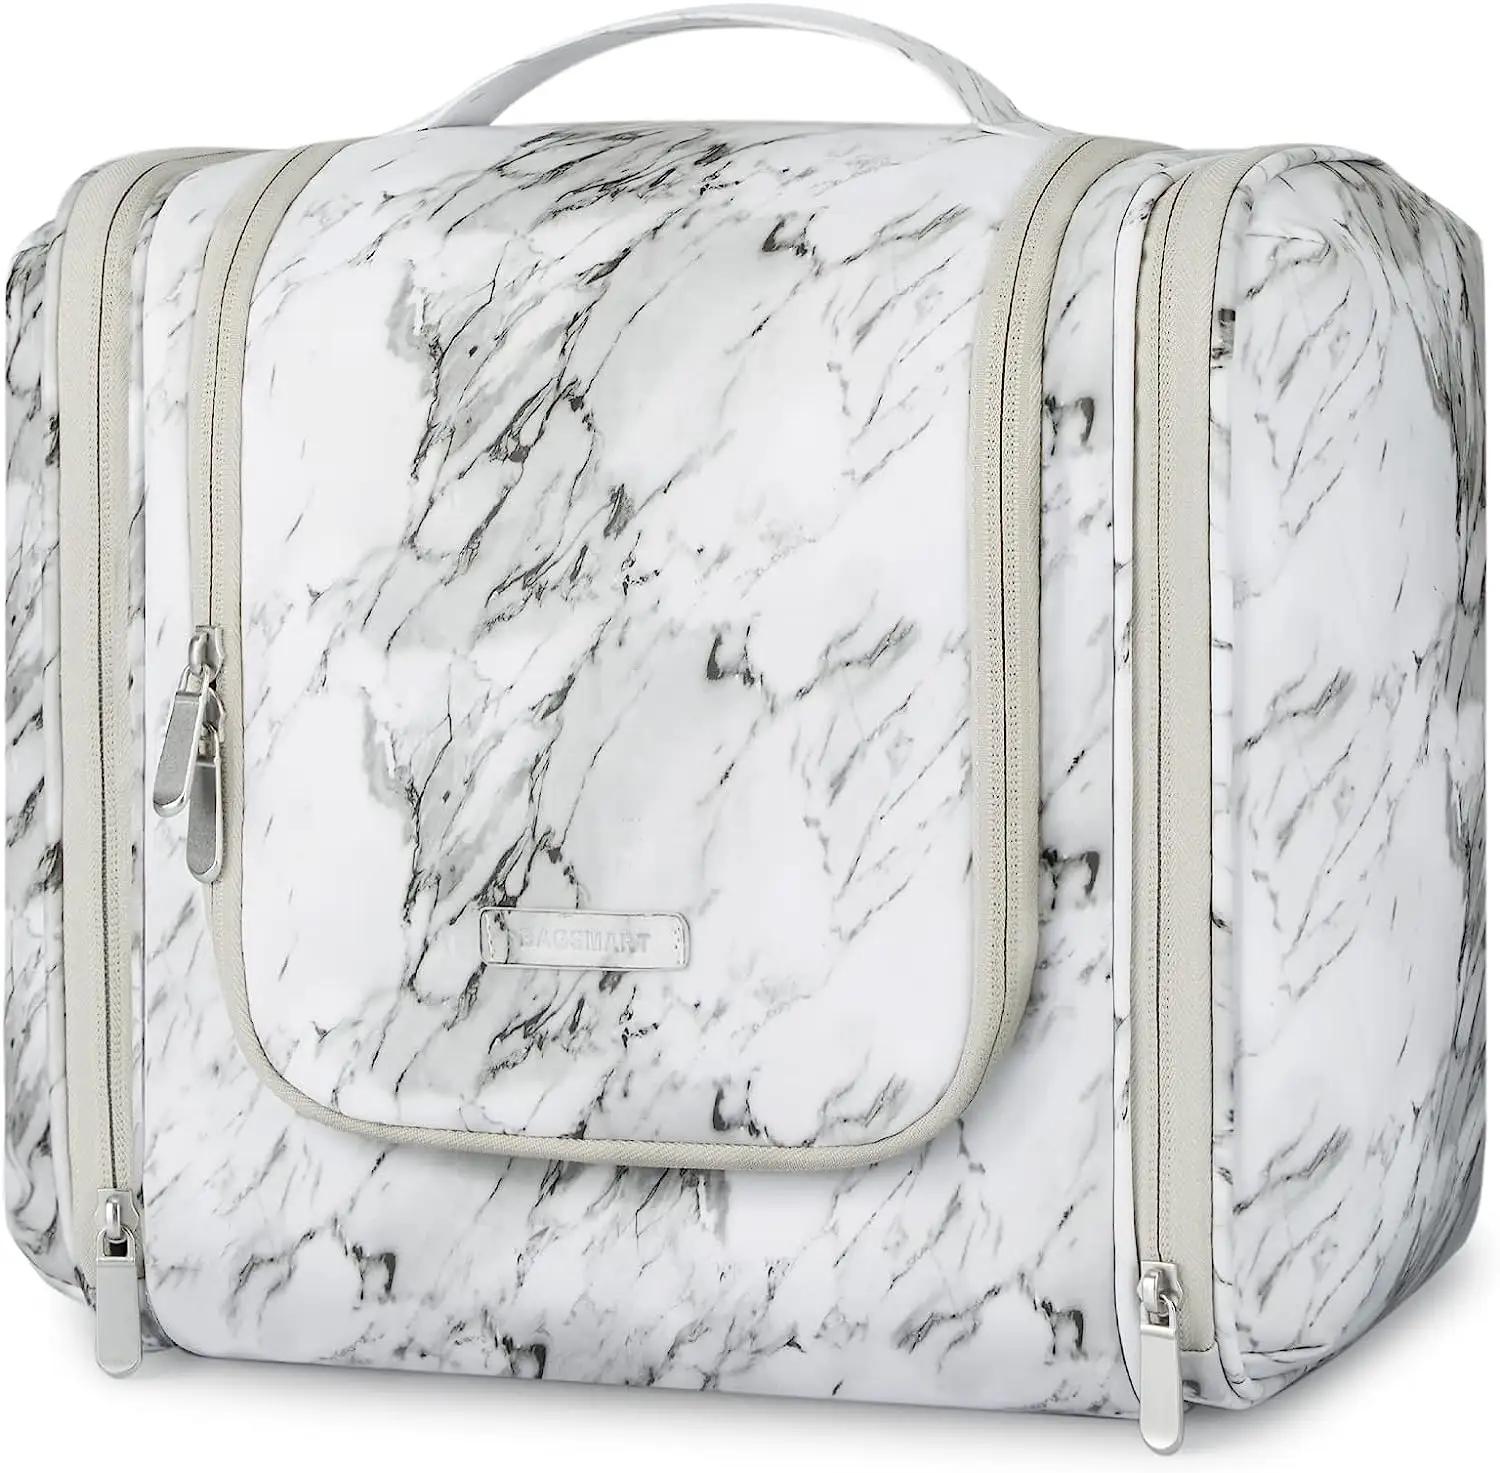 Large Toiletry Bag Hanging Travel Toiletry Tote for Women Water-resistant Cosmetic Makeup For Full Sized White Marble Pattern